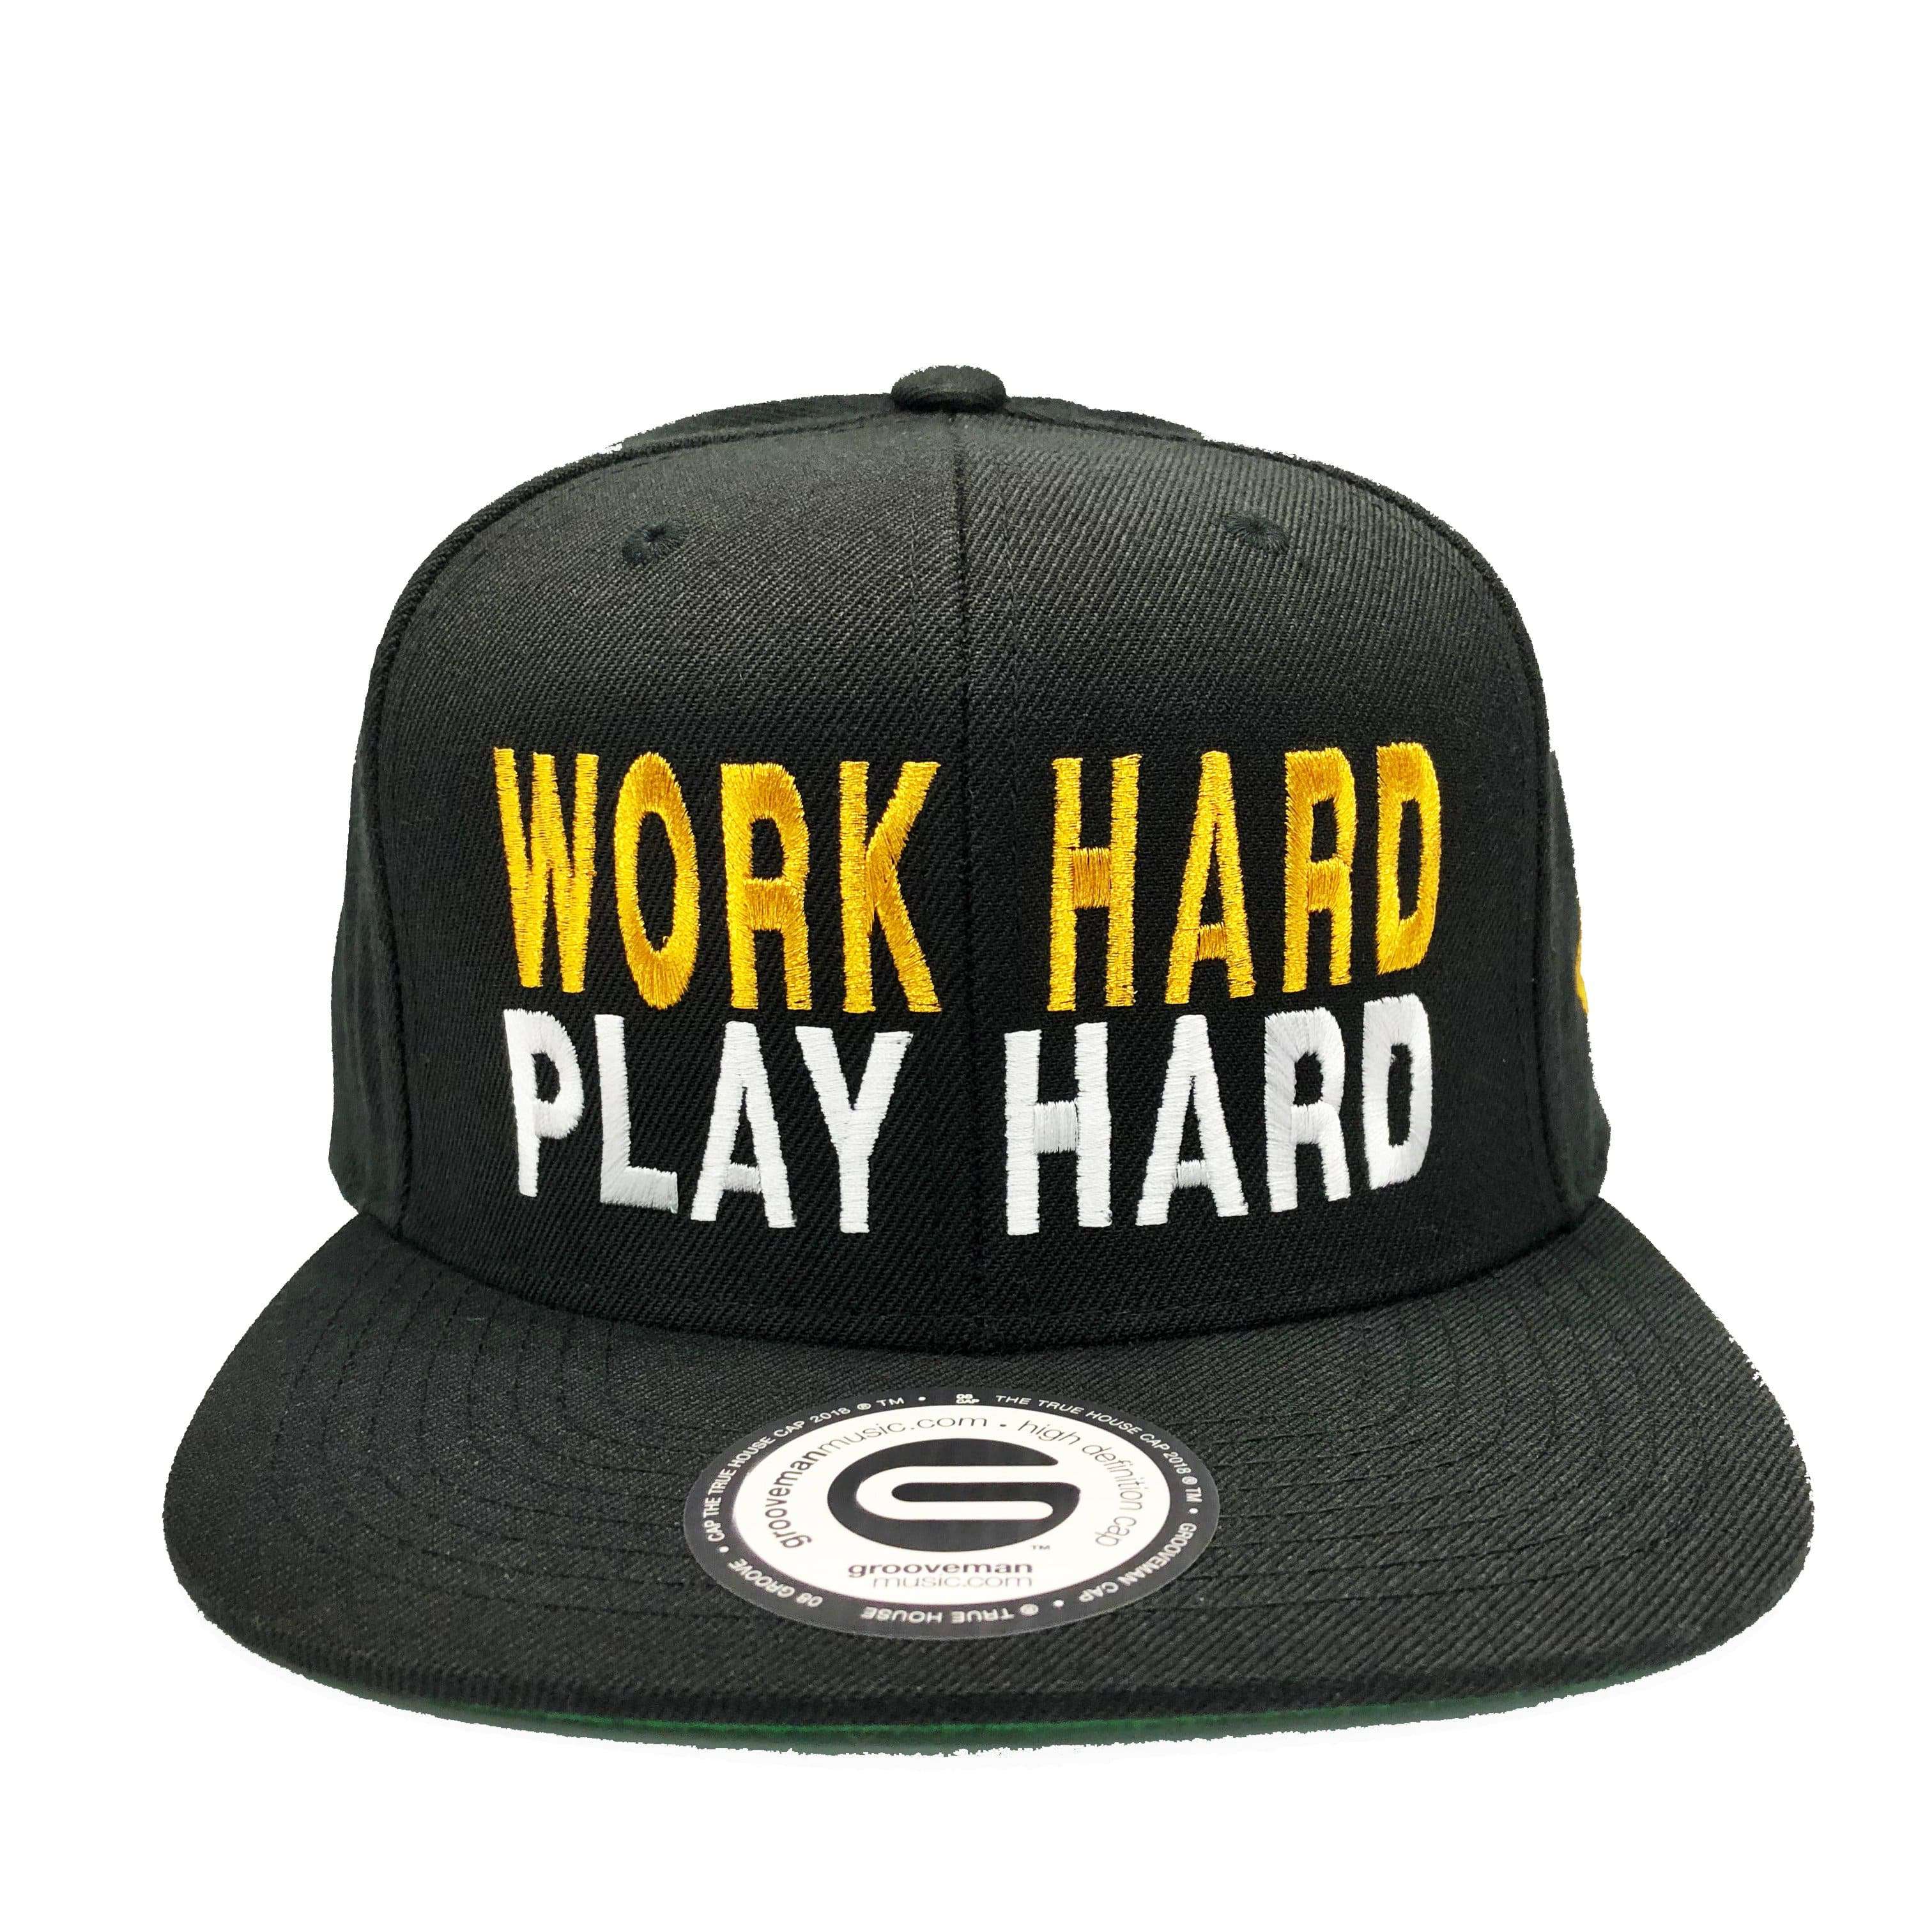 Grooveman Music Hats One Size / Black and Gold Work Hard Play Hard Black and Gold Hat